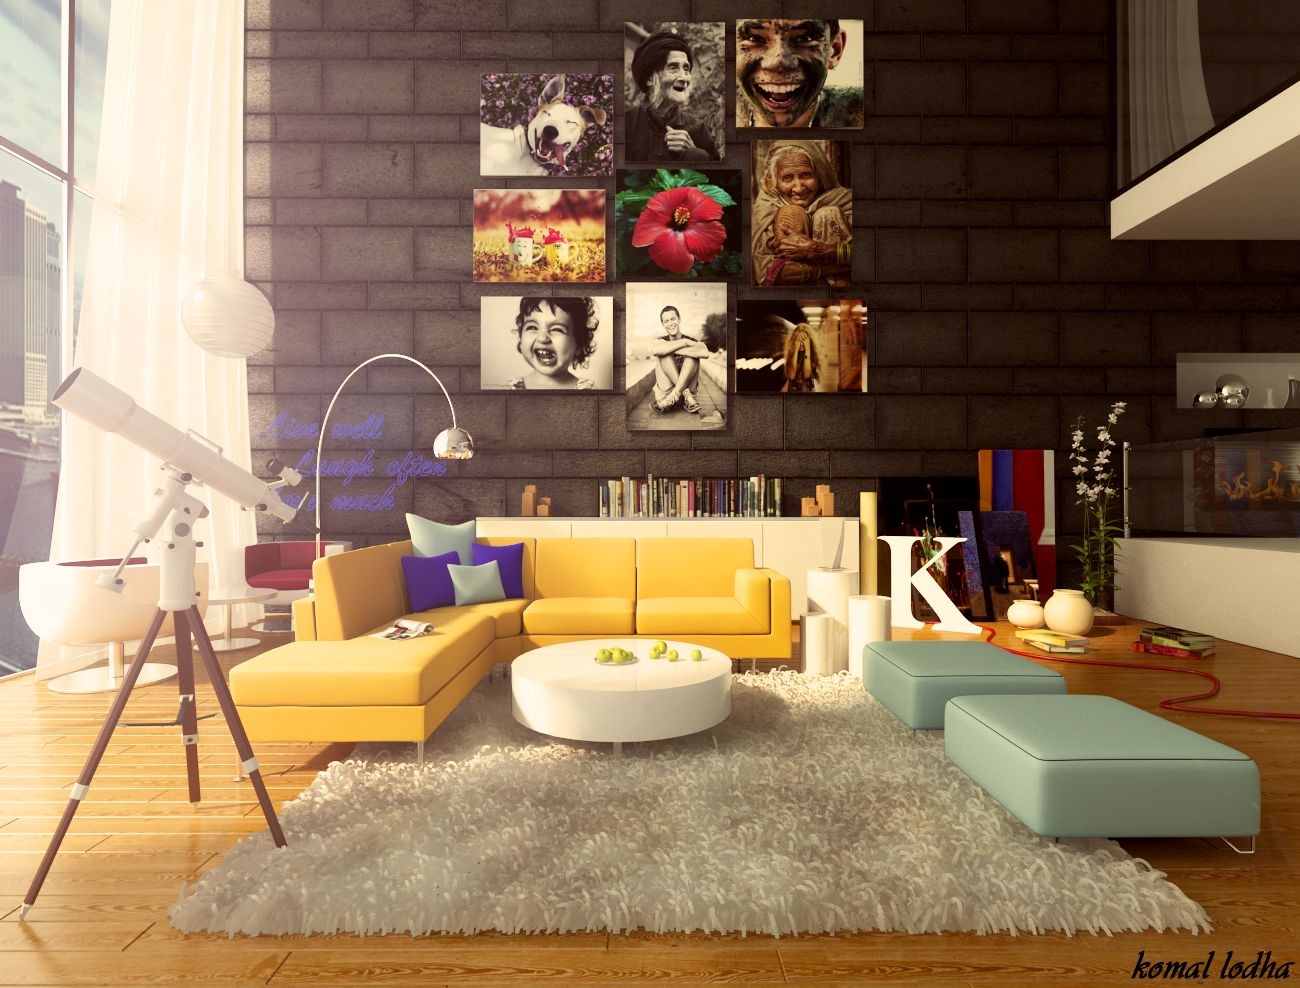 yellow living room "width =" 1300 "height =" 988 "srcset =" https://mileray.com/wp-content/uploads/2020/05/1588516542_478_Modern-Living-Room-Designs-Complete-With-Perfect-Lighting-and-Beautiful.jpg 1300w, https: // myfashionos. com / wp-content / uploads / 2016/10 / Komal-Lodh-1-300x228.jpg 300w, https://mileray.com/wp-content/uploads/2016/10/Komal-Lodh-1-768x584.jpg 768w, https://mileray.com/wp-content/uploads/2016/10/Komal-Lodh-1-1024x778.jpg 1024w, https://mileray.com/wp-content/uploads/2016/10/Komal -Lodh-1-80x60.jpg 80w, https://mileray.com/wp-content/uploads/2016/10/Komal-Lodh-1-696x529.jpg 696w, https://mileray.com/wp-content /uploads/2016/10/Komal-Lodh-1-1068x812.jpg 1068w, https://mileray.com/wp-content/uploads/2016/10/Komal-Lodh-1-553x420.jpg 553w "size =" (maximum width: 1300 pixels) 100 VW, 1300 pixels